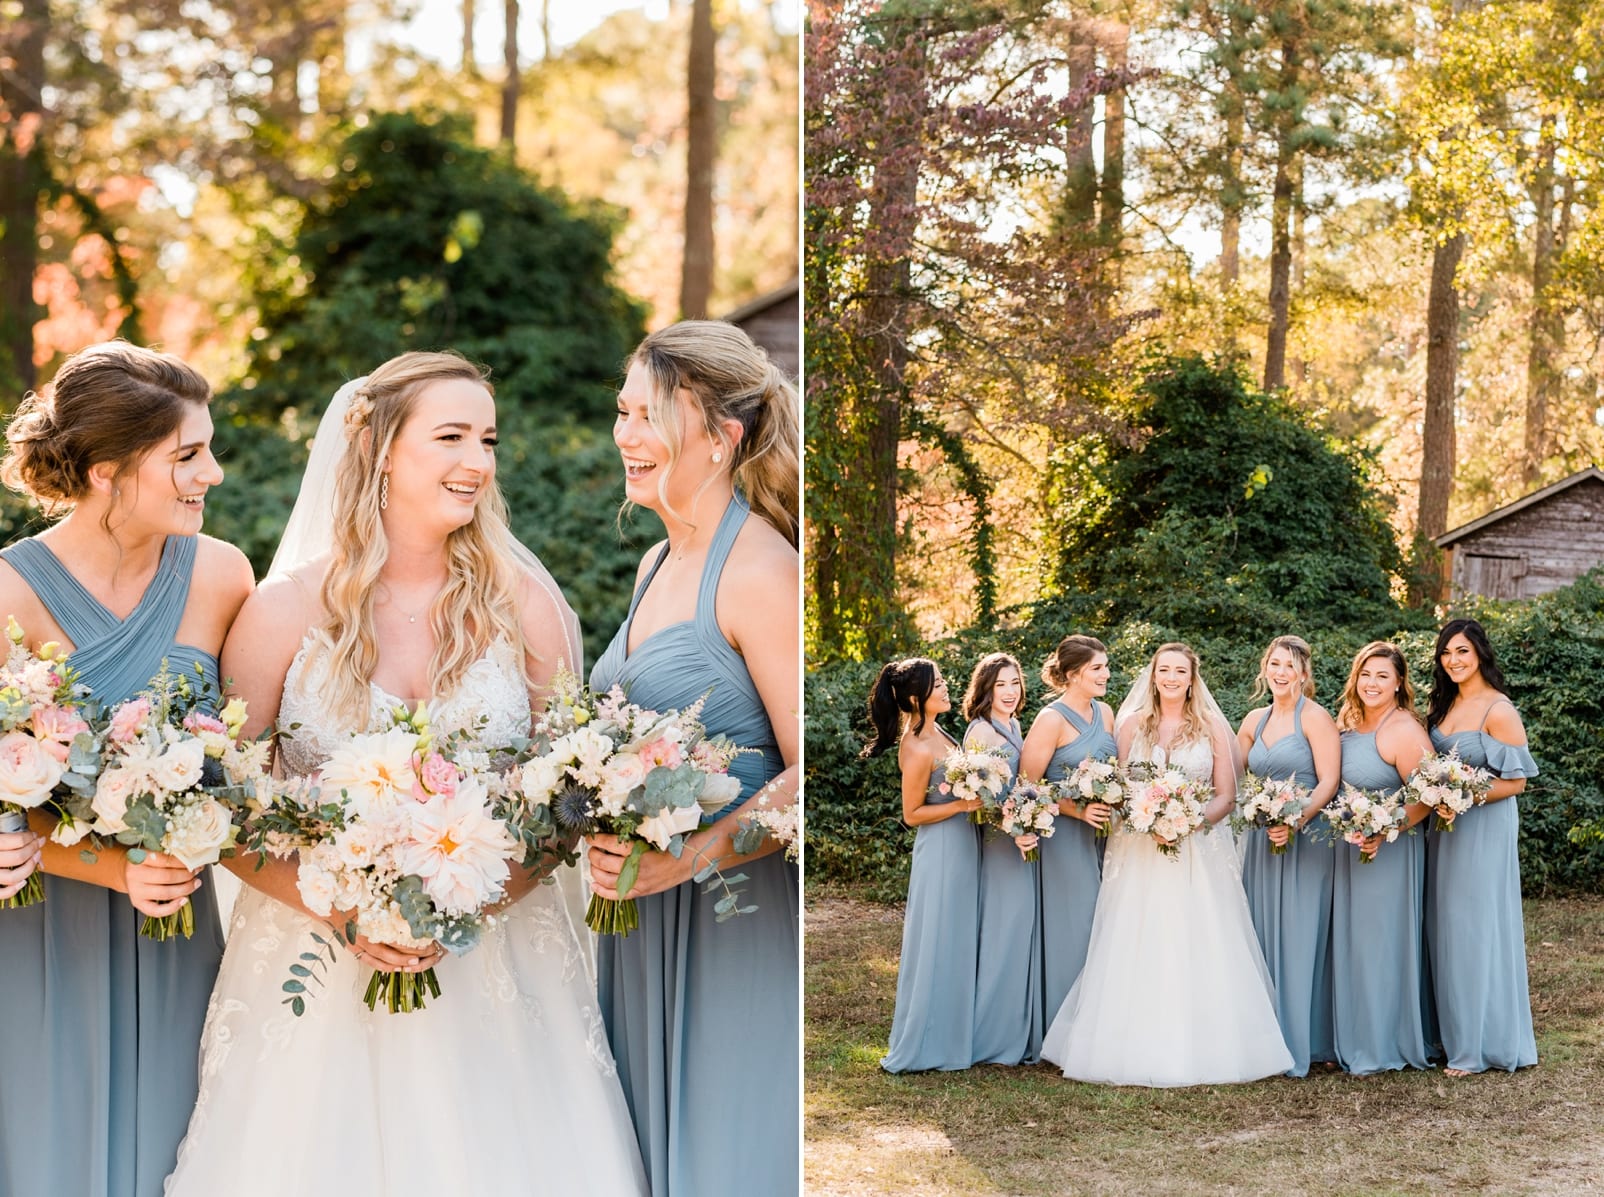 Oaks at Salem bride with her bridesmaids in long blue dresses photo